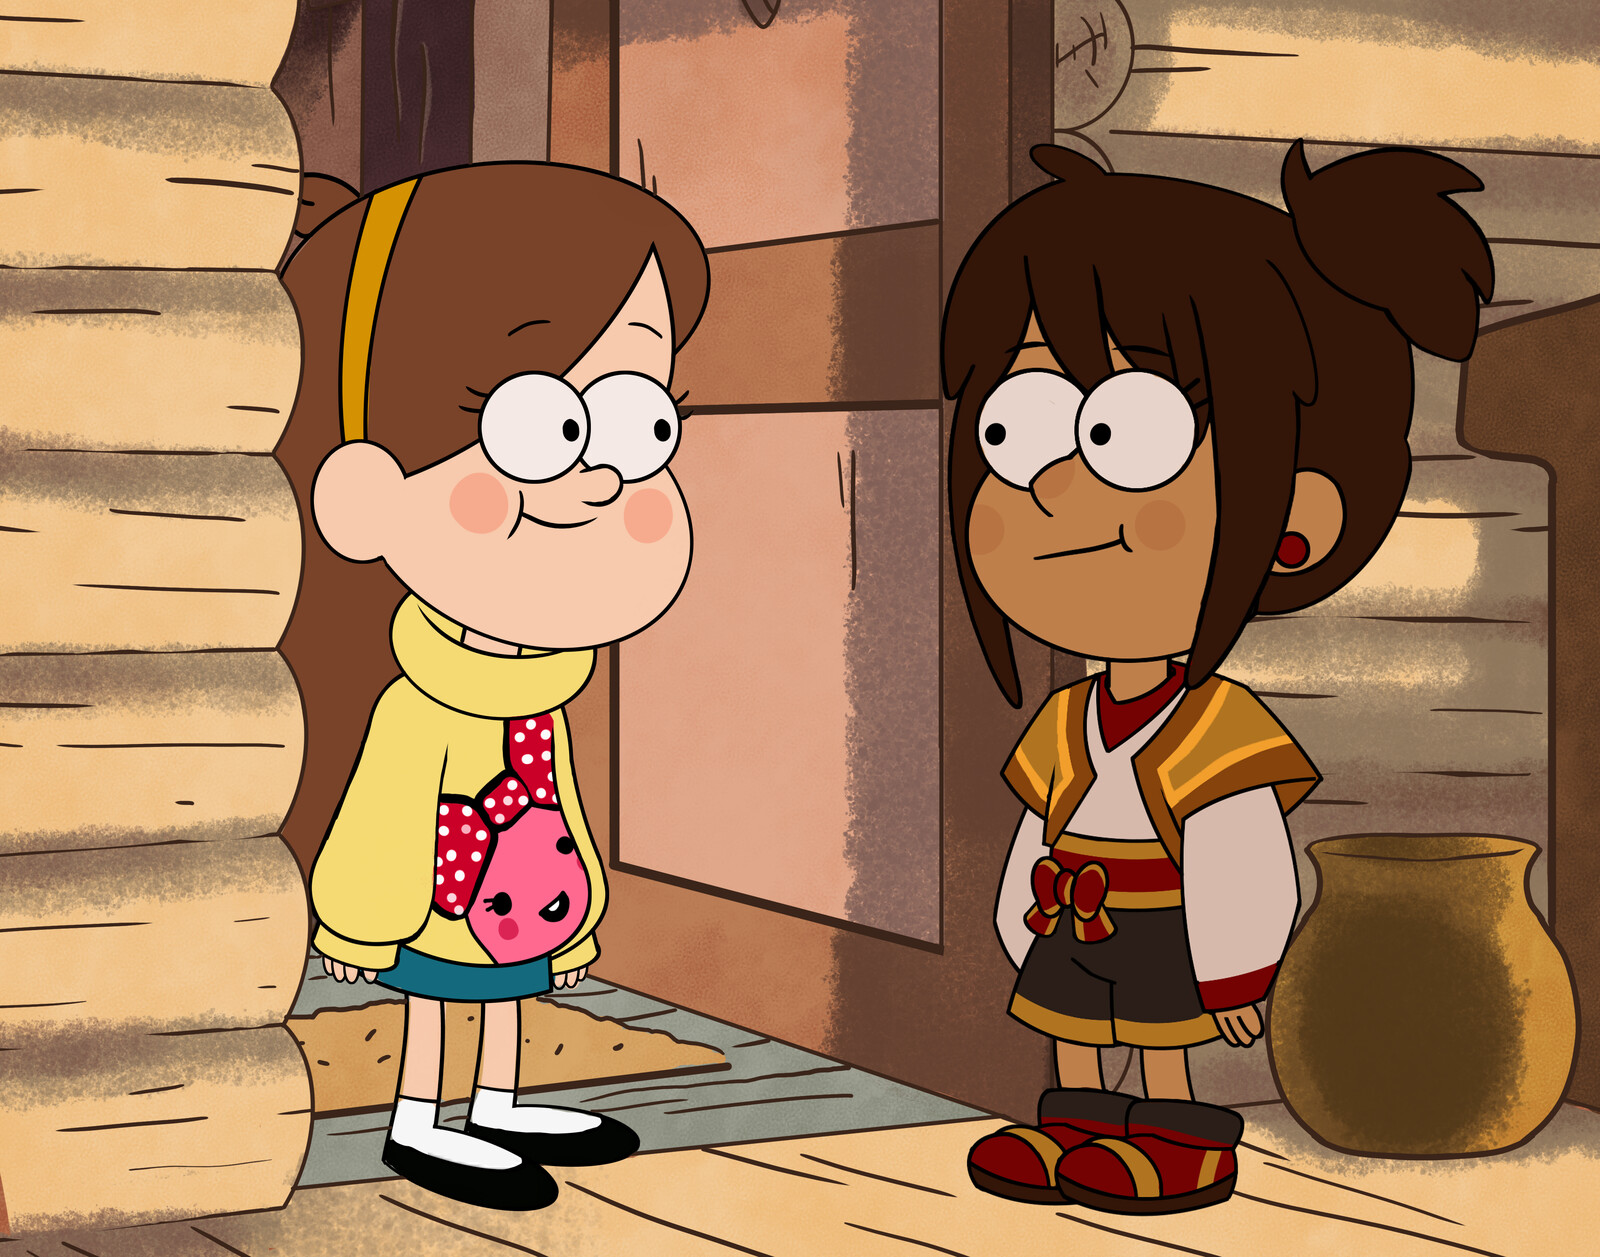 Adapting the character to Gravity Falls' style and inserting them into a recreated scene.